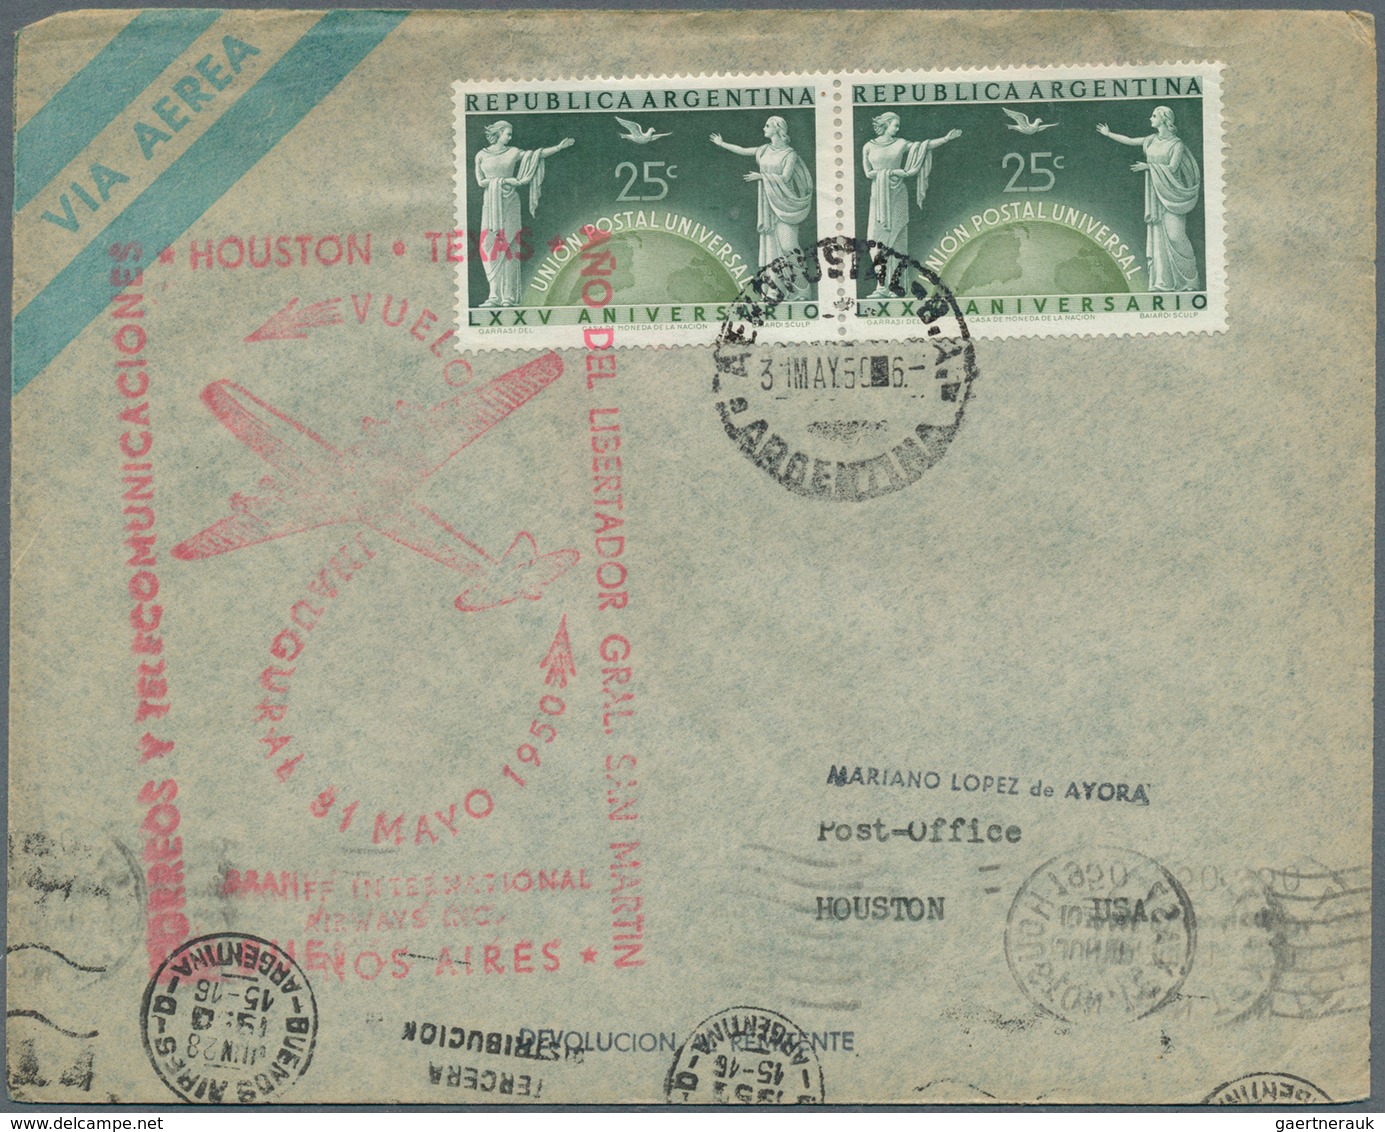 25861 Thematik: UPU / united postal union: 1949/1979, accumulation of apprx. 180 thematic covers/cards wit